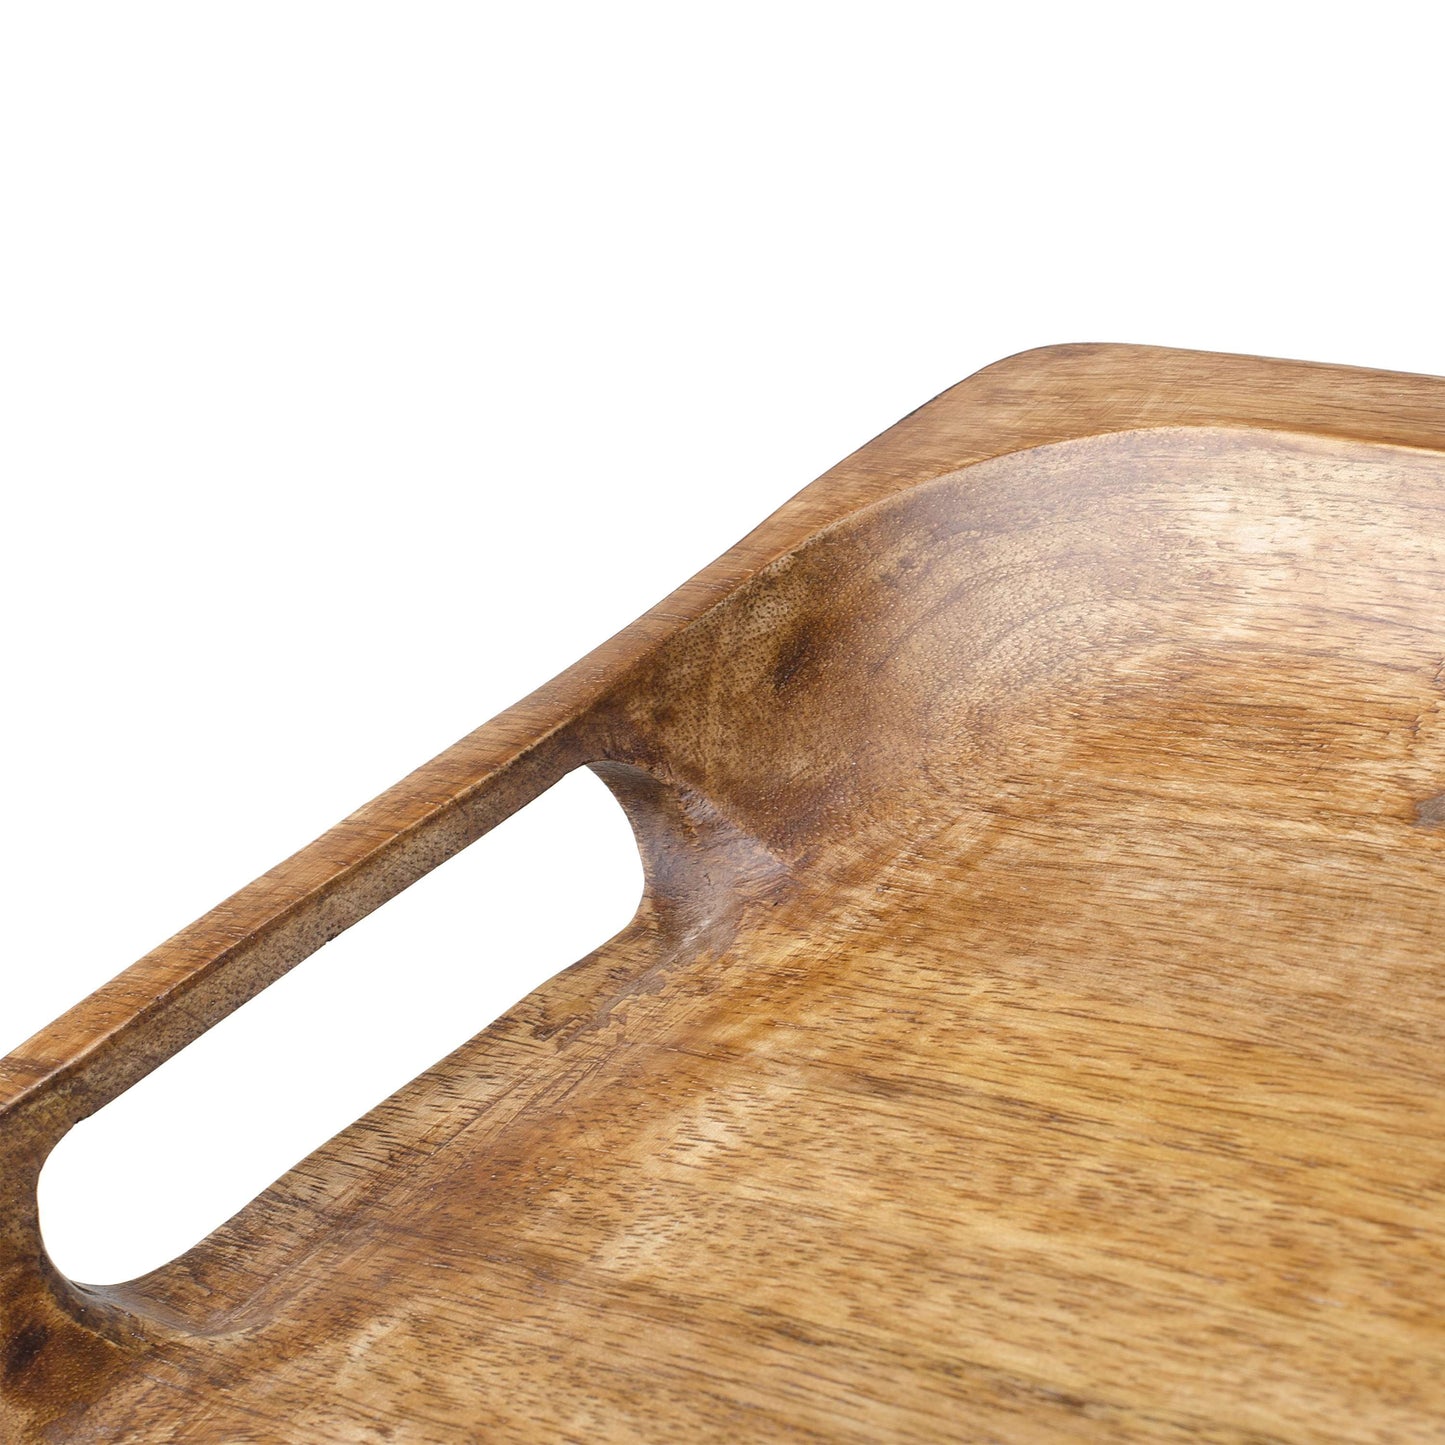 SWHF Pure Wood Rectangle Platter Serving Tray - SWHF